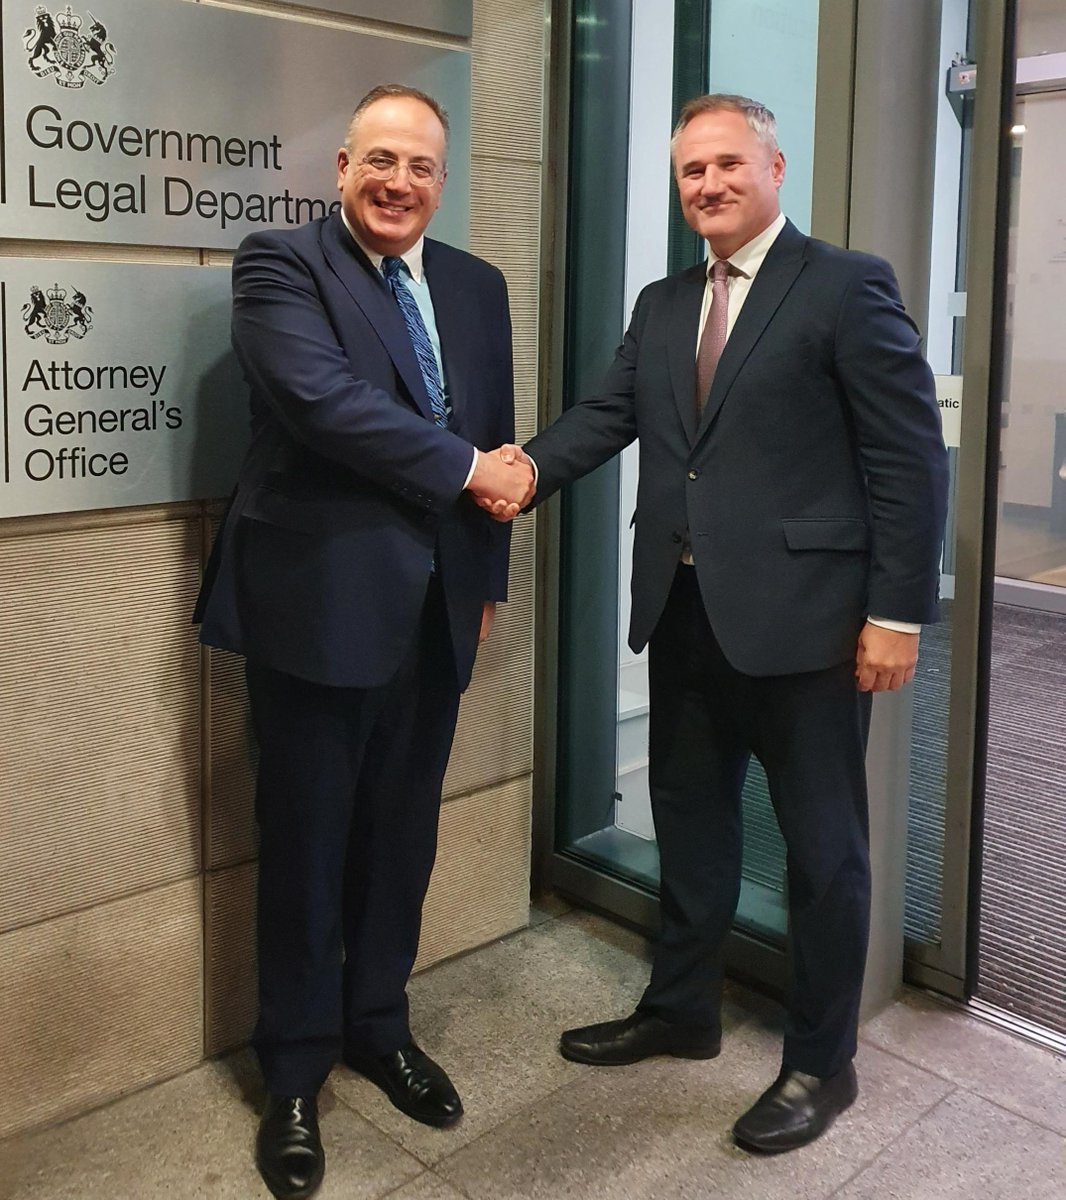 Last night we welcomed the new Attorney General @Michael_Ellis1 to the department where he was met by our Director General Douglas Wilson. #Reshuffle